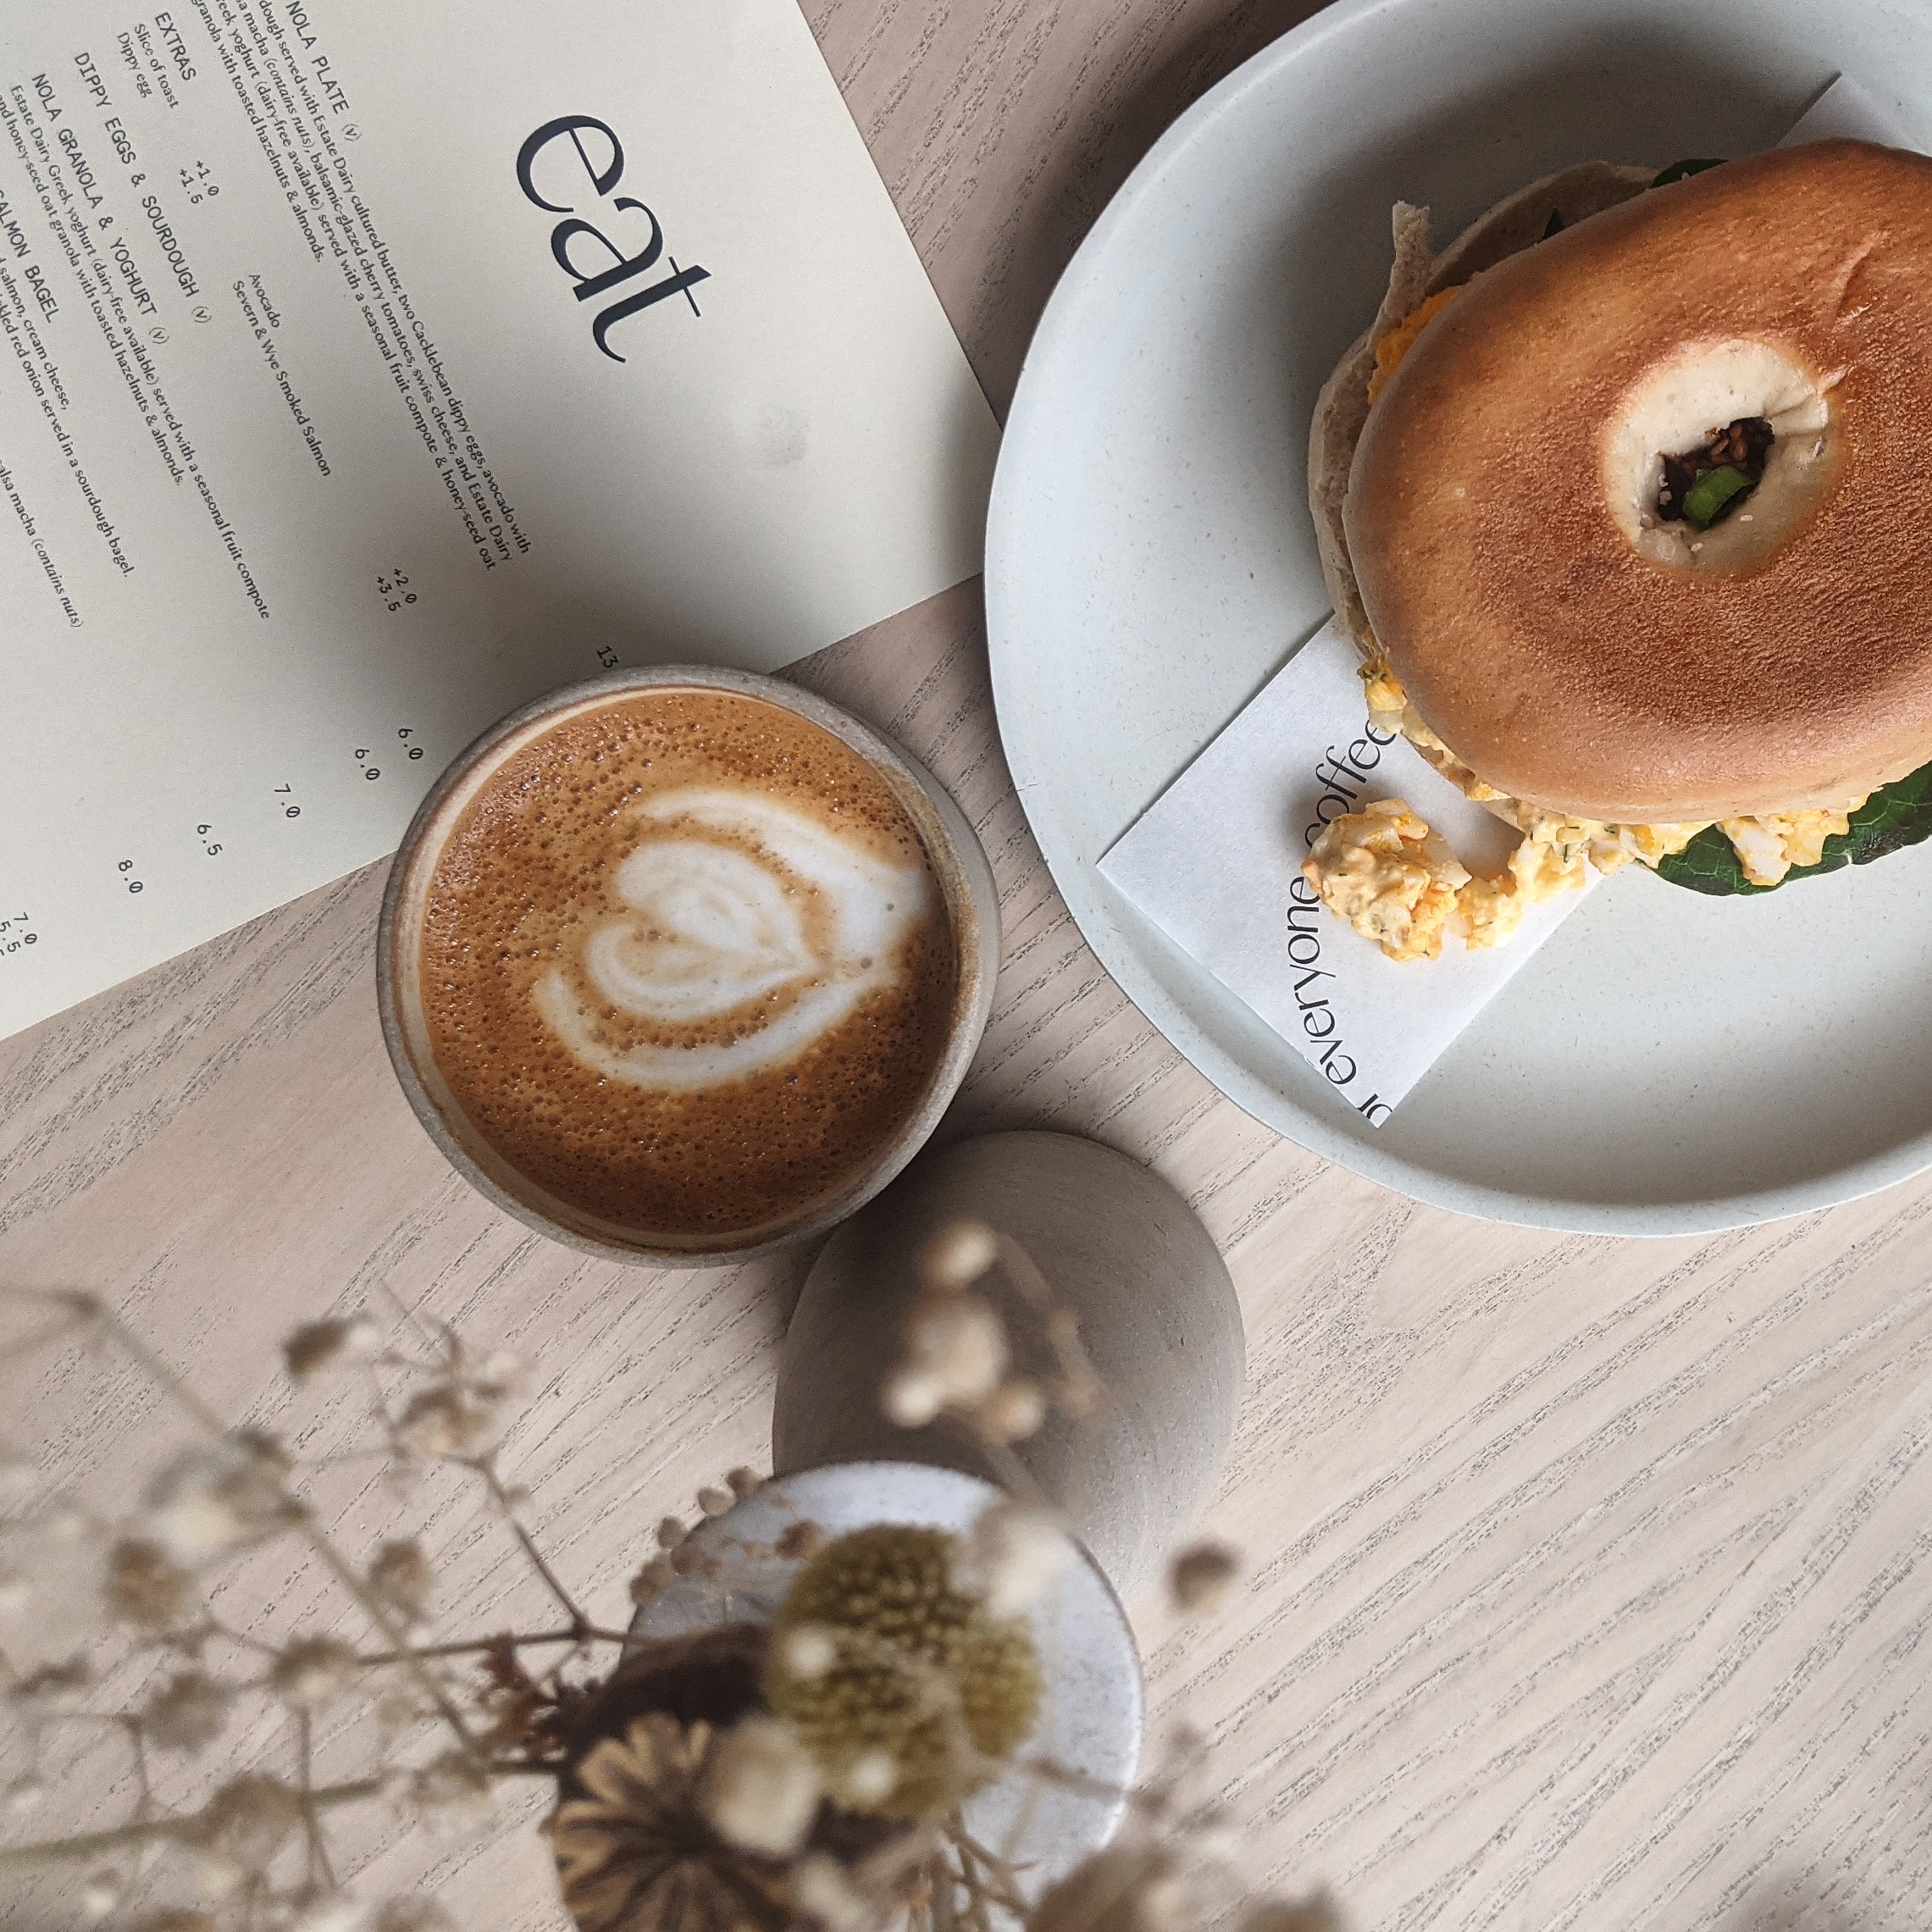 A filled bagel next to a flat white at Nola in Peckham, one of the best places to get a unique breakfast in london